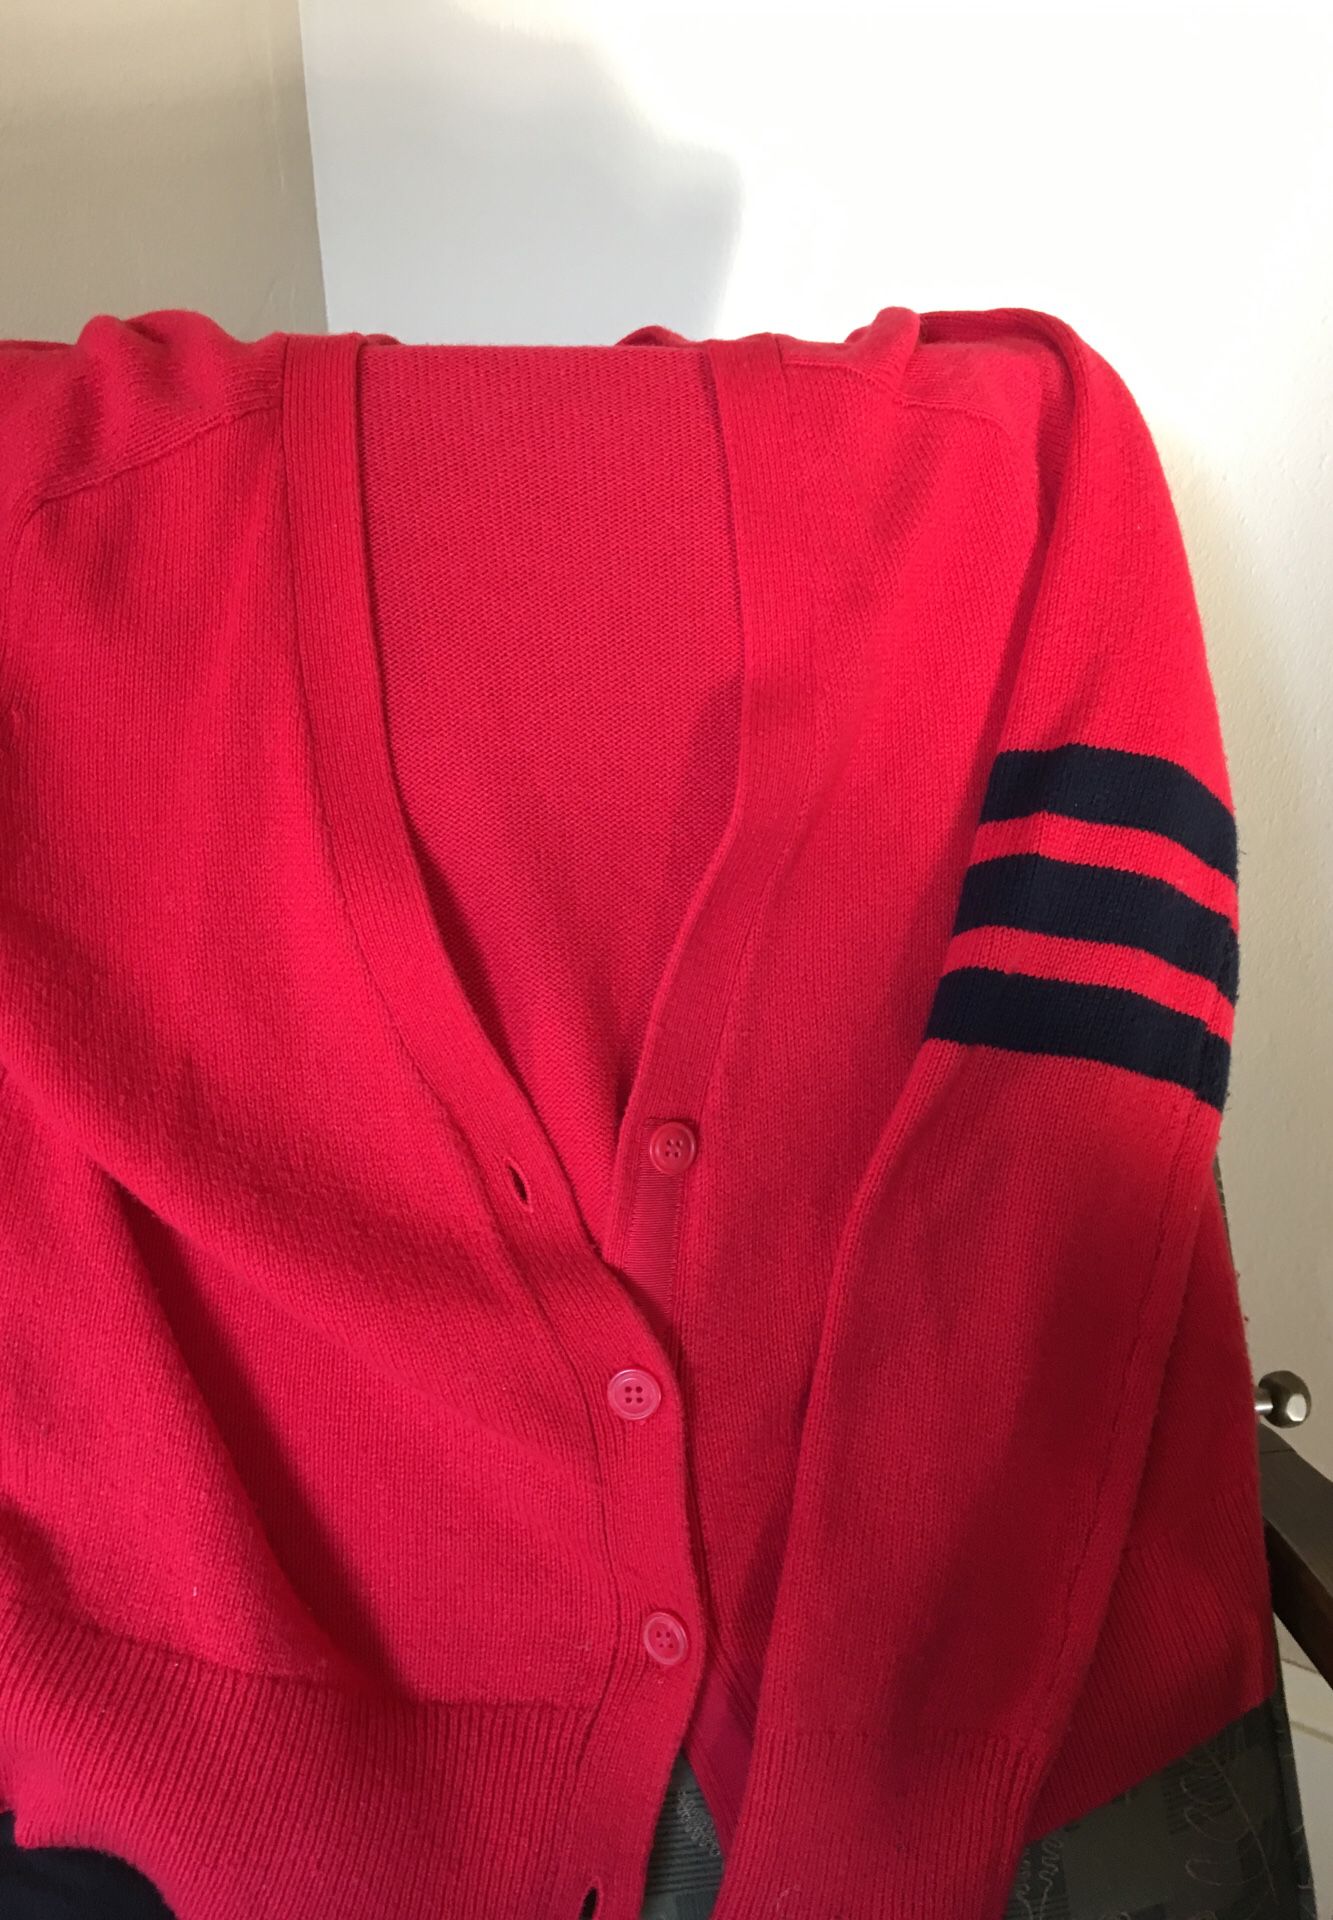 Red cardigan (size M) with varsity stripes on sleeves. Cute!